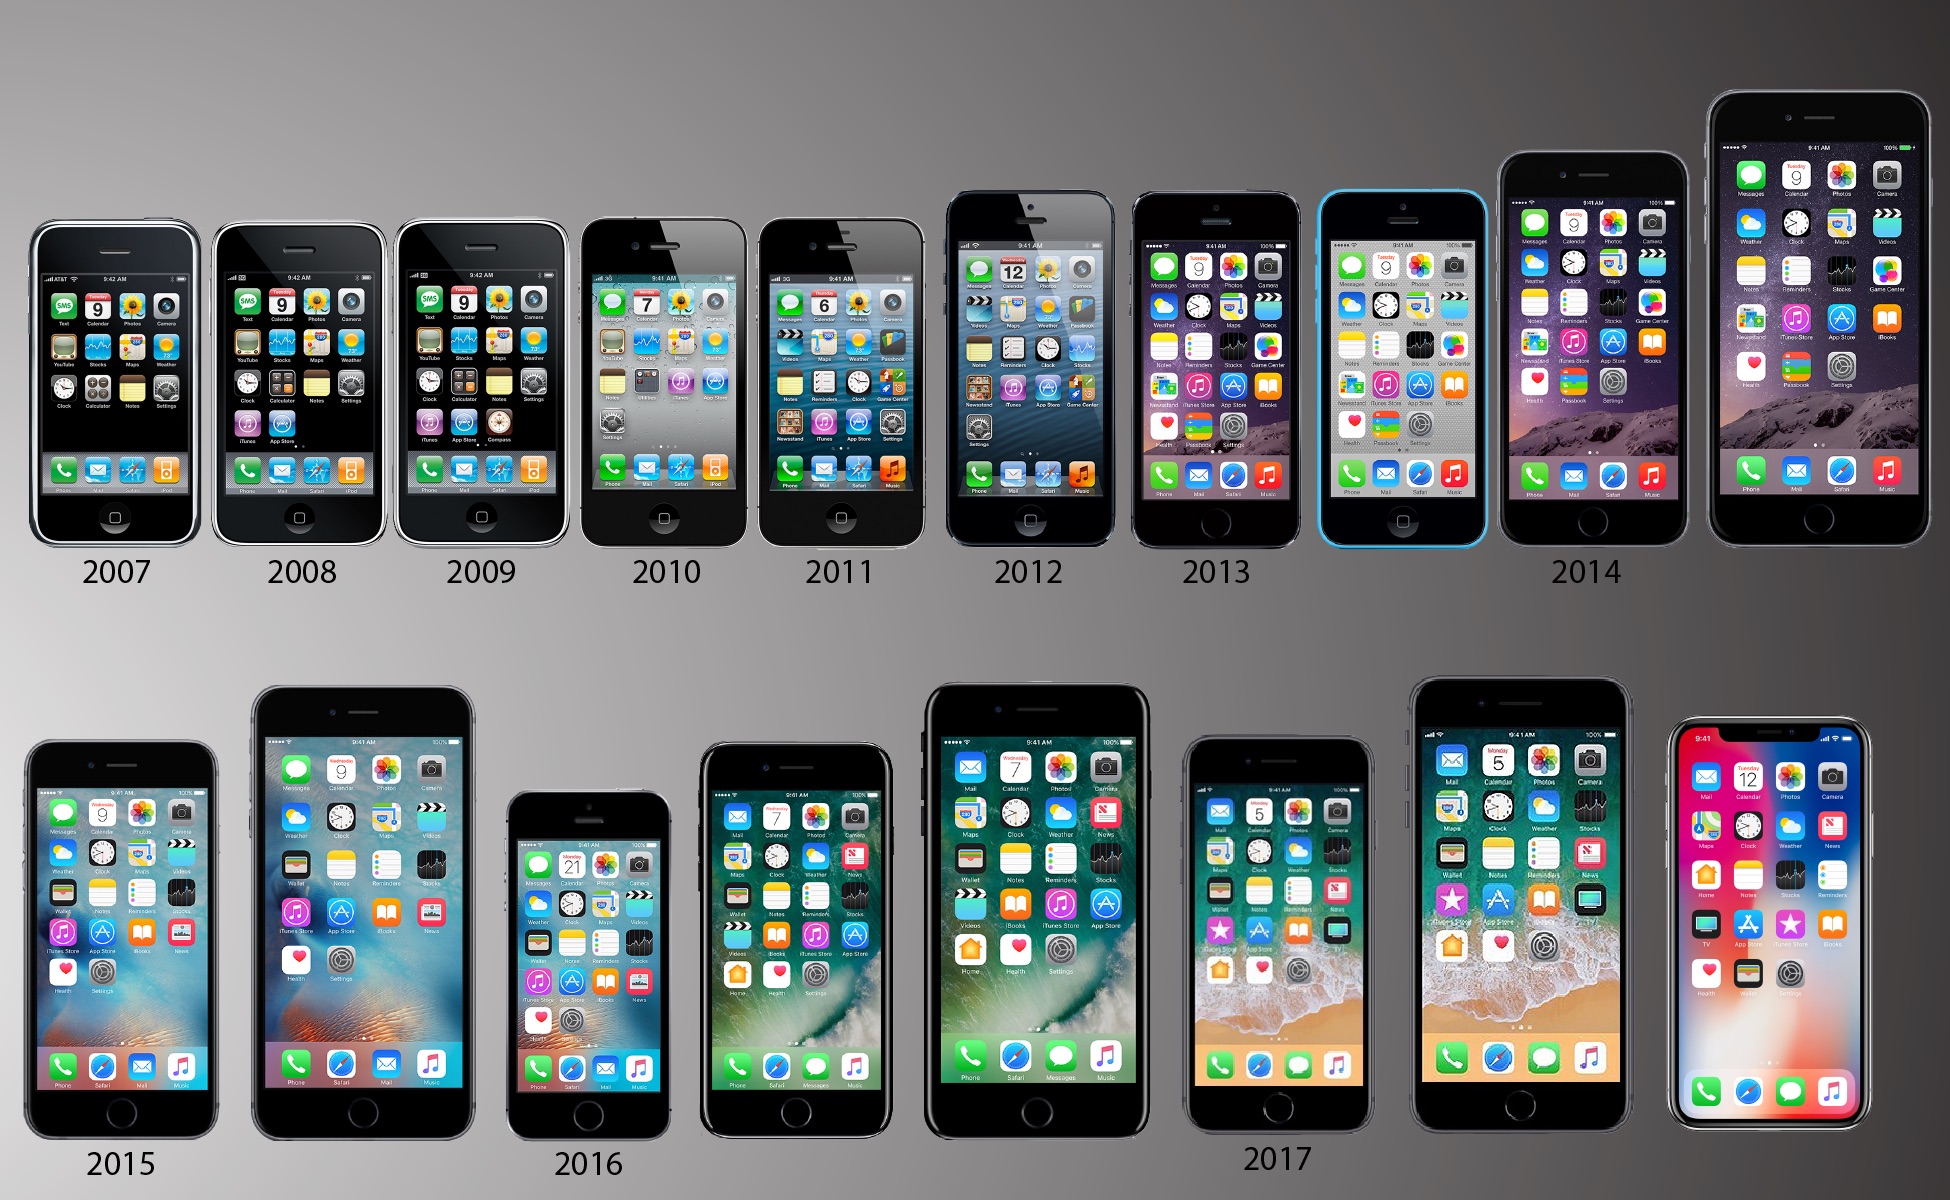 IPHONE REVOLUTION FROM PAST TO PRESENT